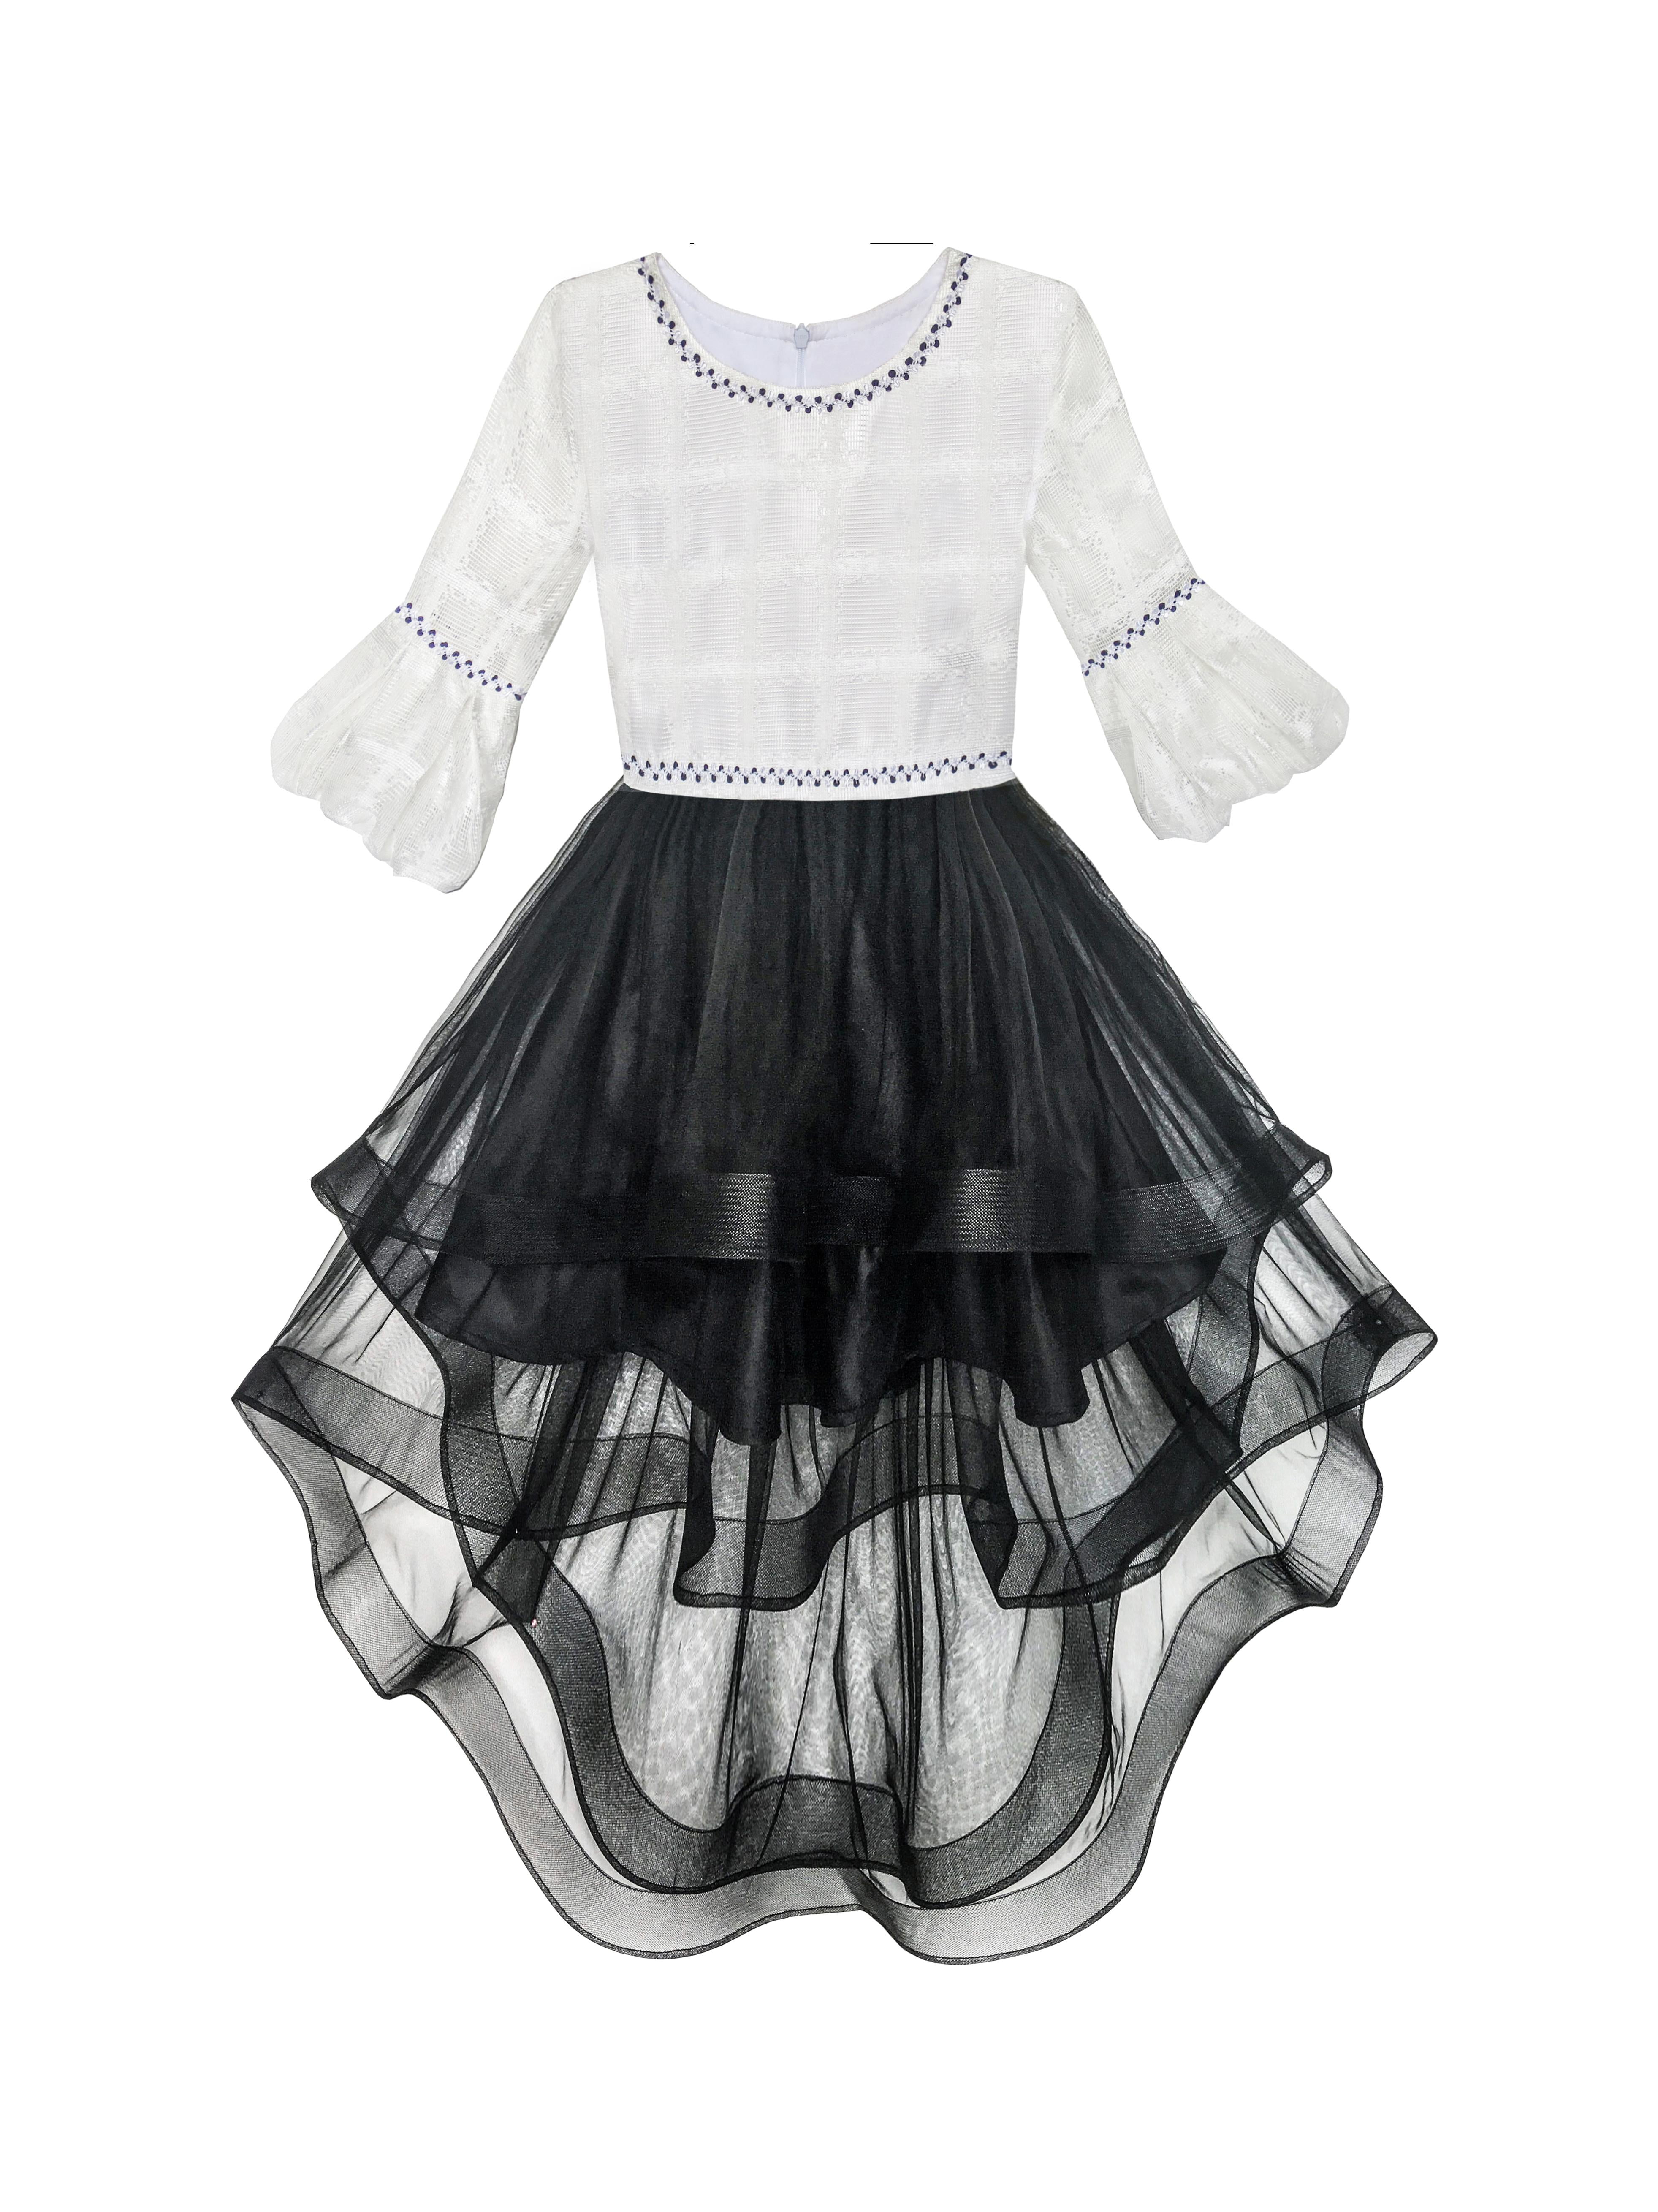 Kids Girls Dress White and Black Hi-lo Party Birthday Pageant  6-14 Formal 